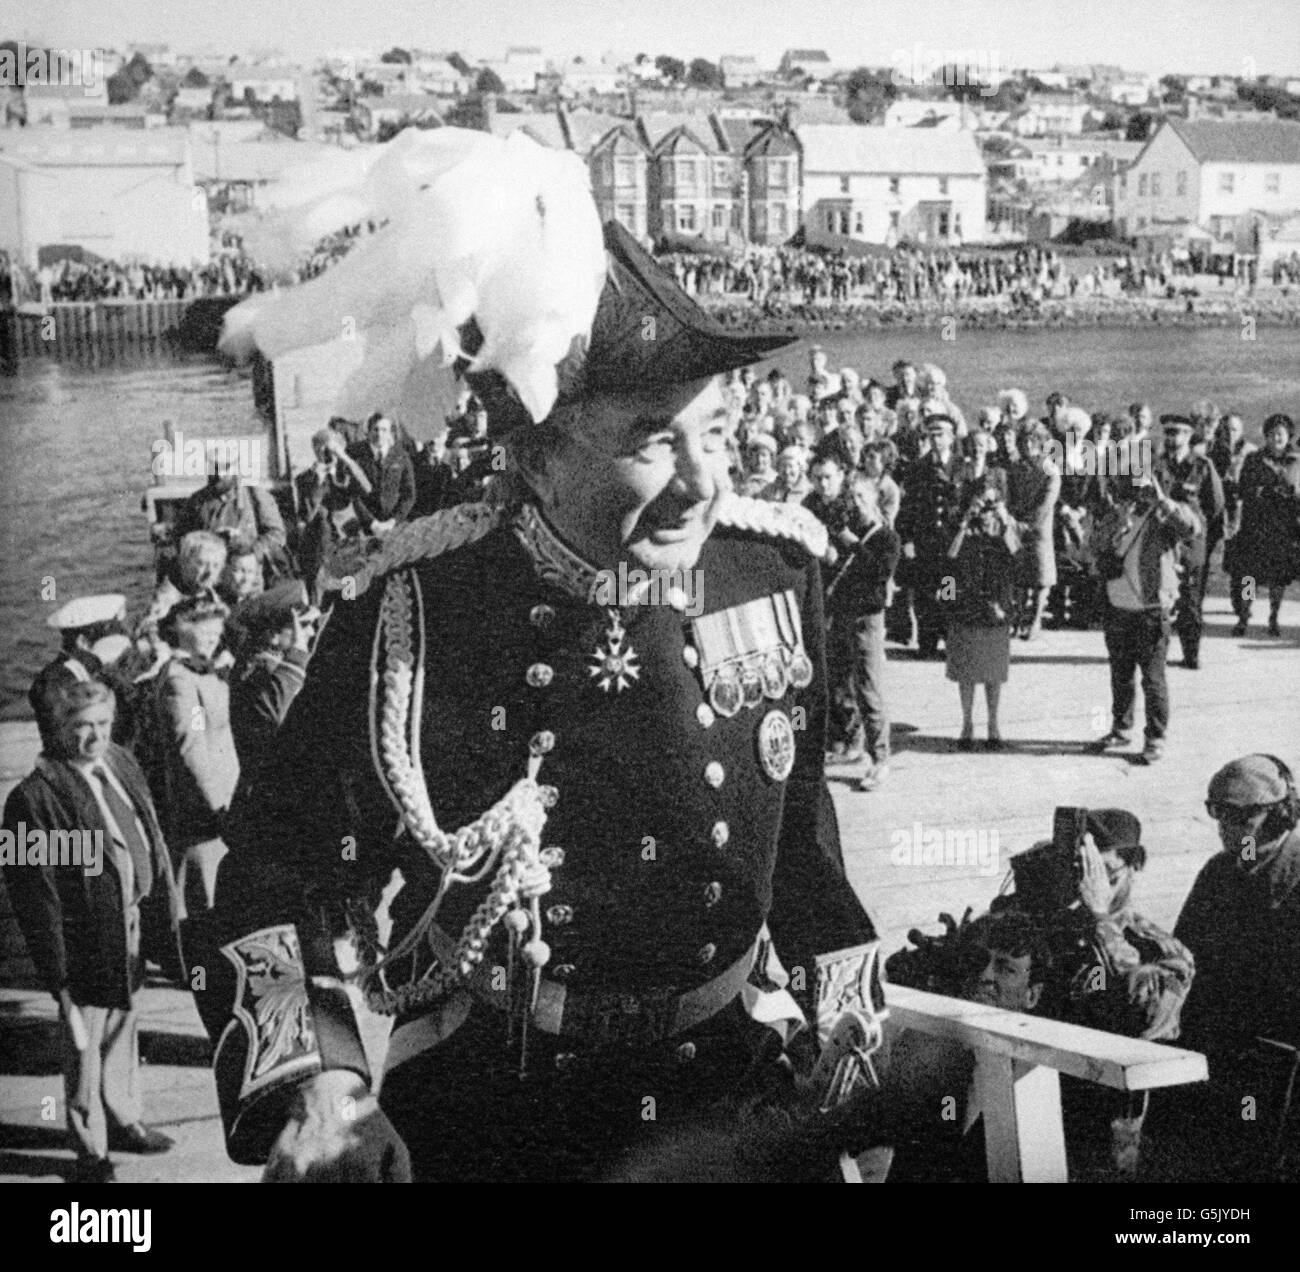 Civil Commissioner Sir Rex Hunt, who became an international figure during the Falkland Islands conflict in 1982, leaving the island after completing five-and-a-half years as Governor. He is pictured boarding the MV Forrest after an emotional send-off by the people of Port Stanley, whereupon he will head back to Britain and retirement. Stock Photo